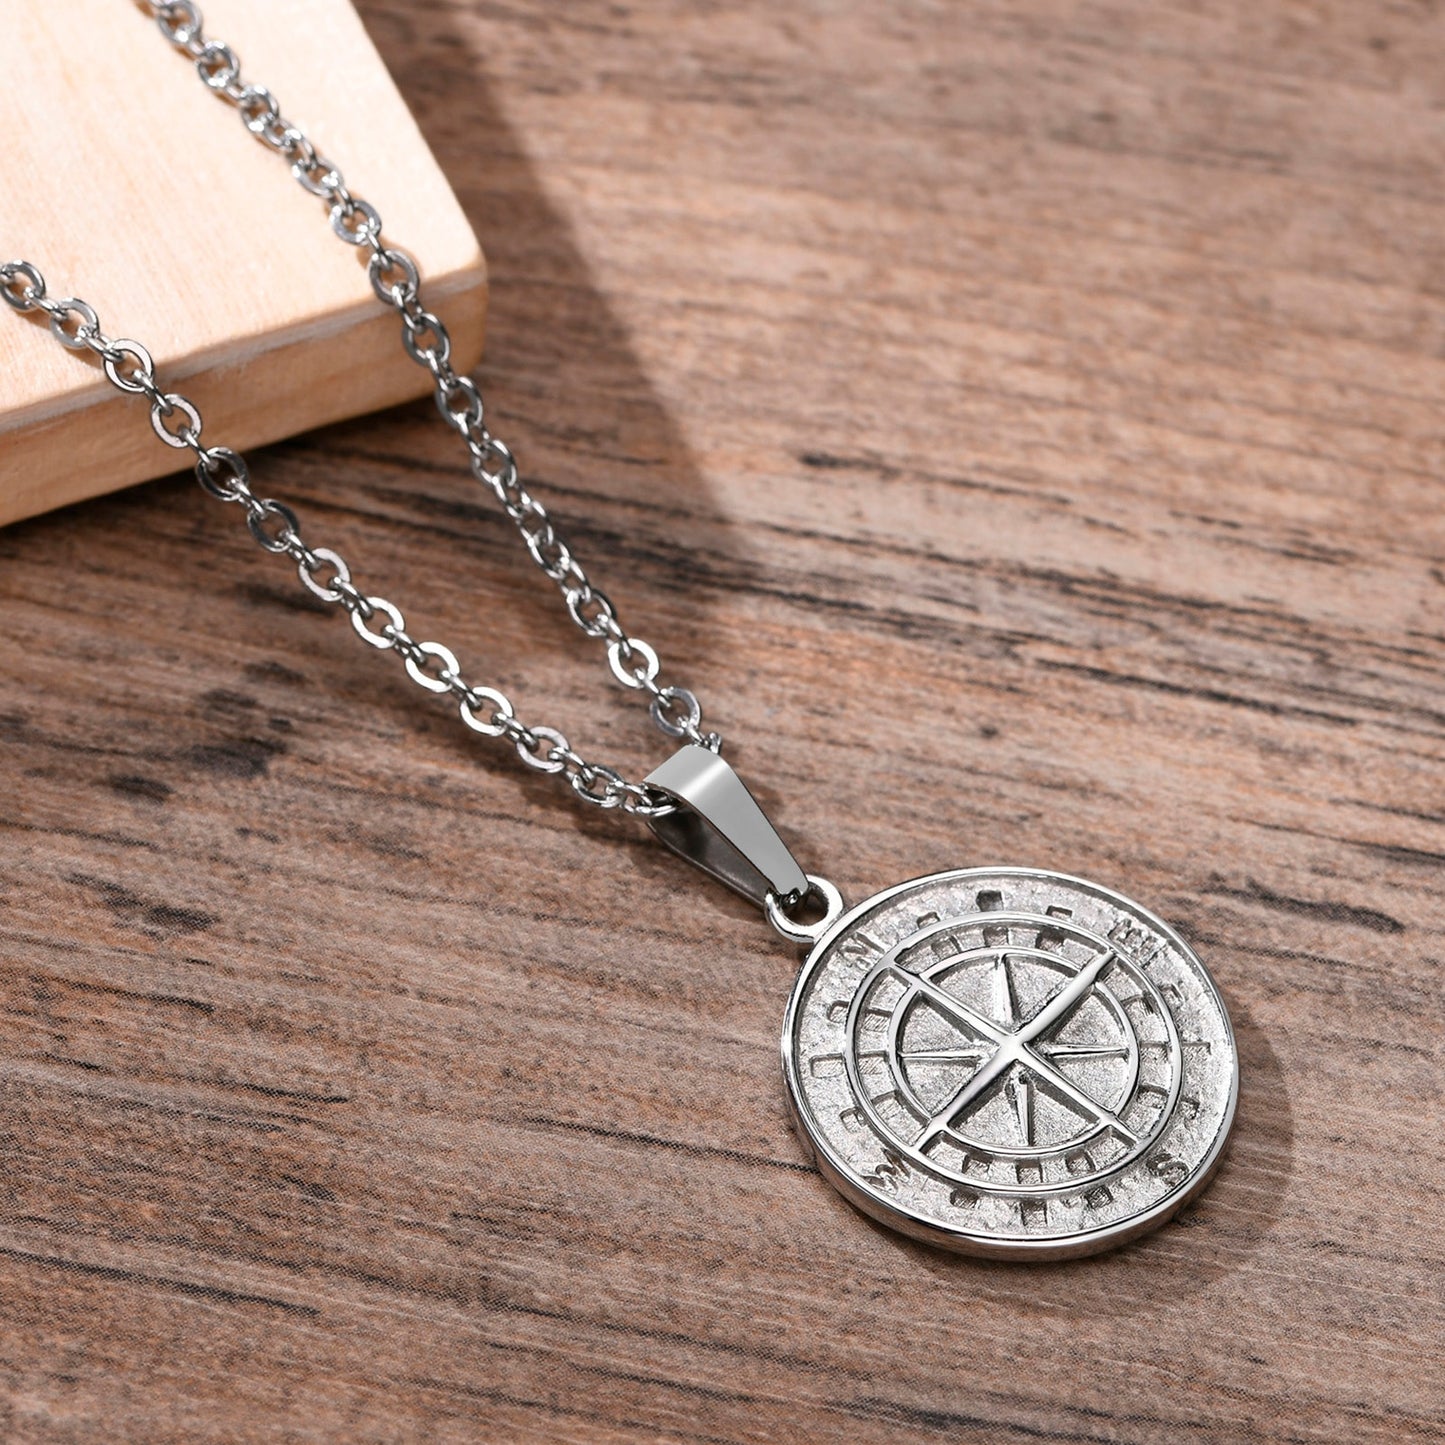 Layered Necklaces With Compass Pendant